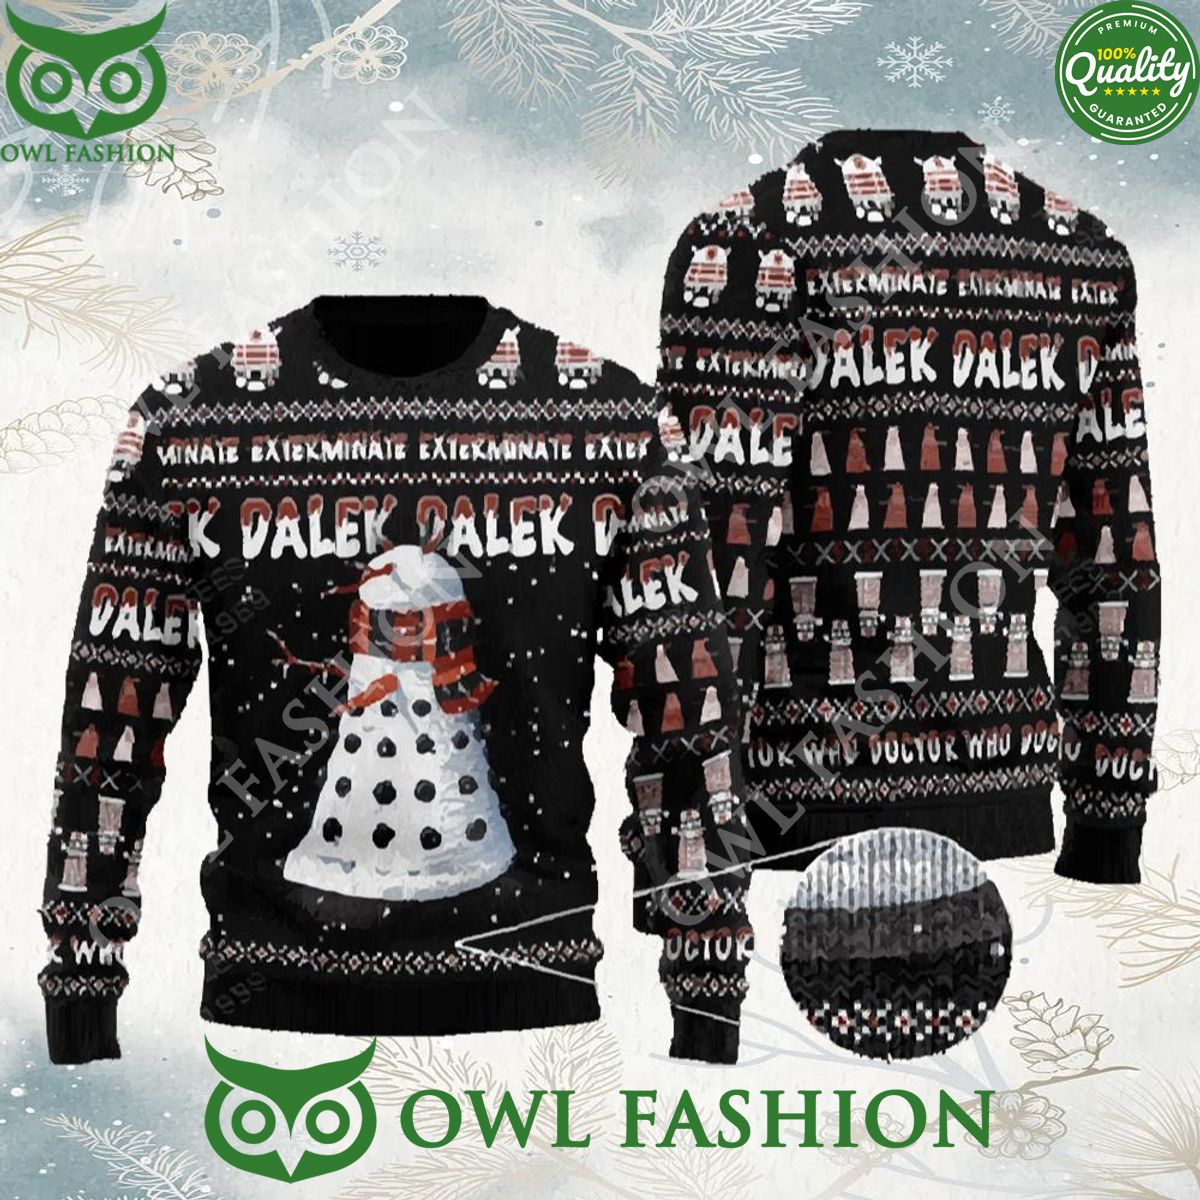 Snowy Dalek Doctor Who Knitted Christmas 3D Sweater Jumper